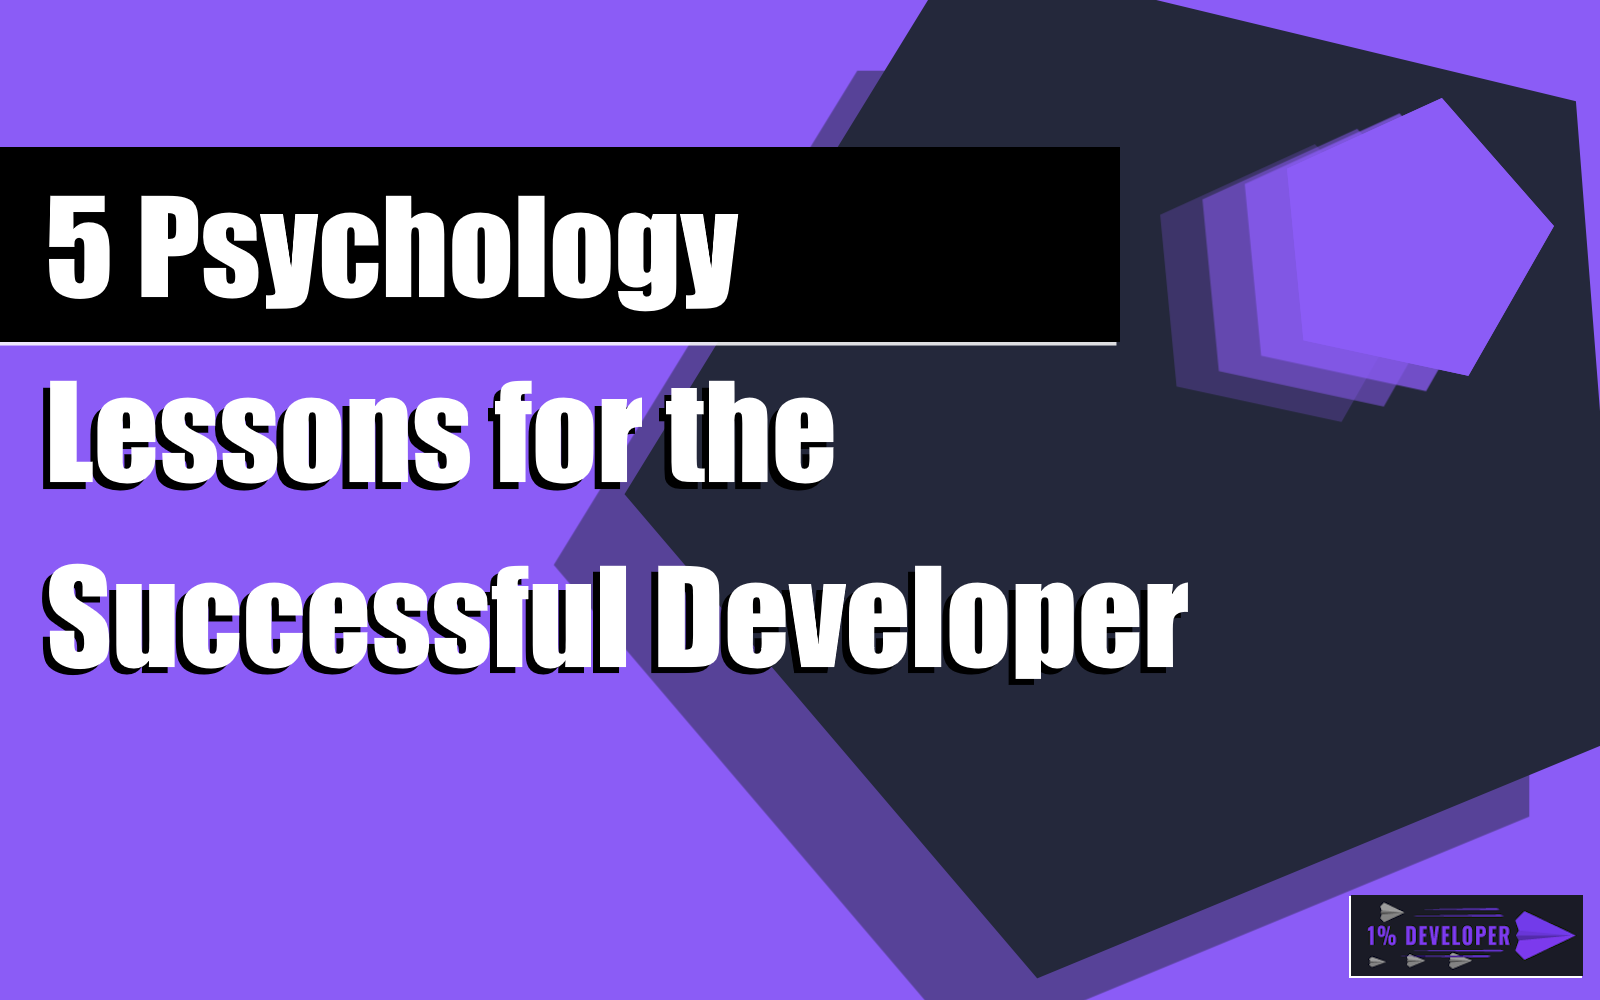 5 Psychology Lessons for the Successful Developer